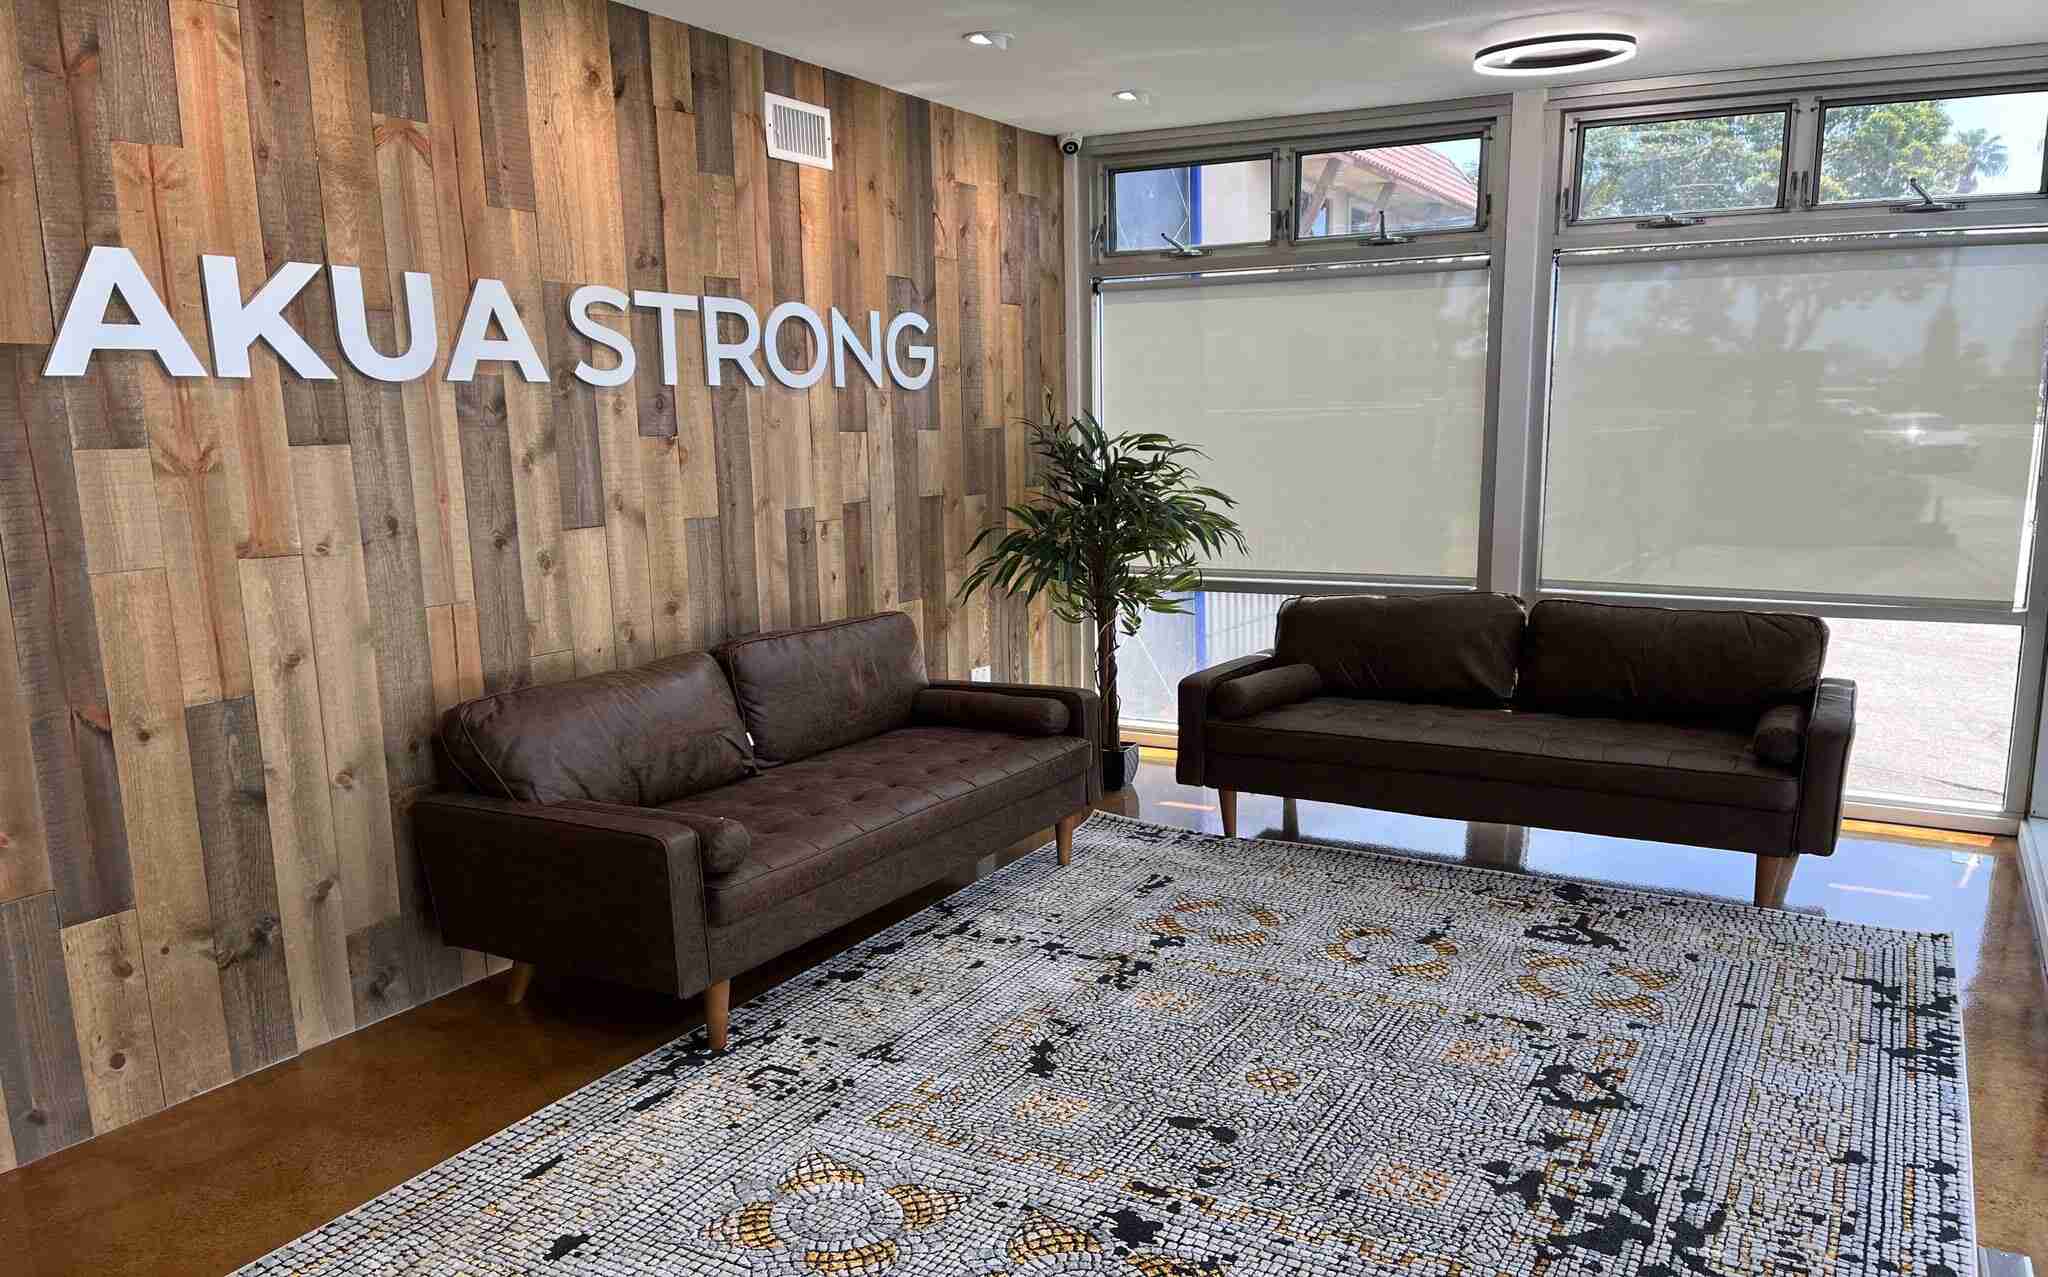 Akua Expands Services with New Outpatient Treatment Center in San Diego, California